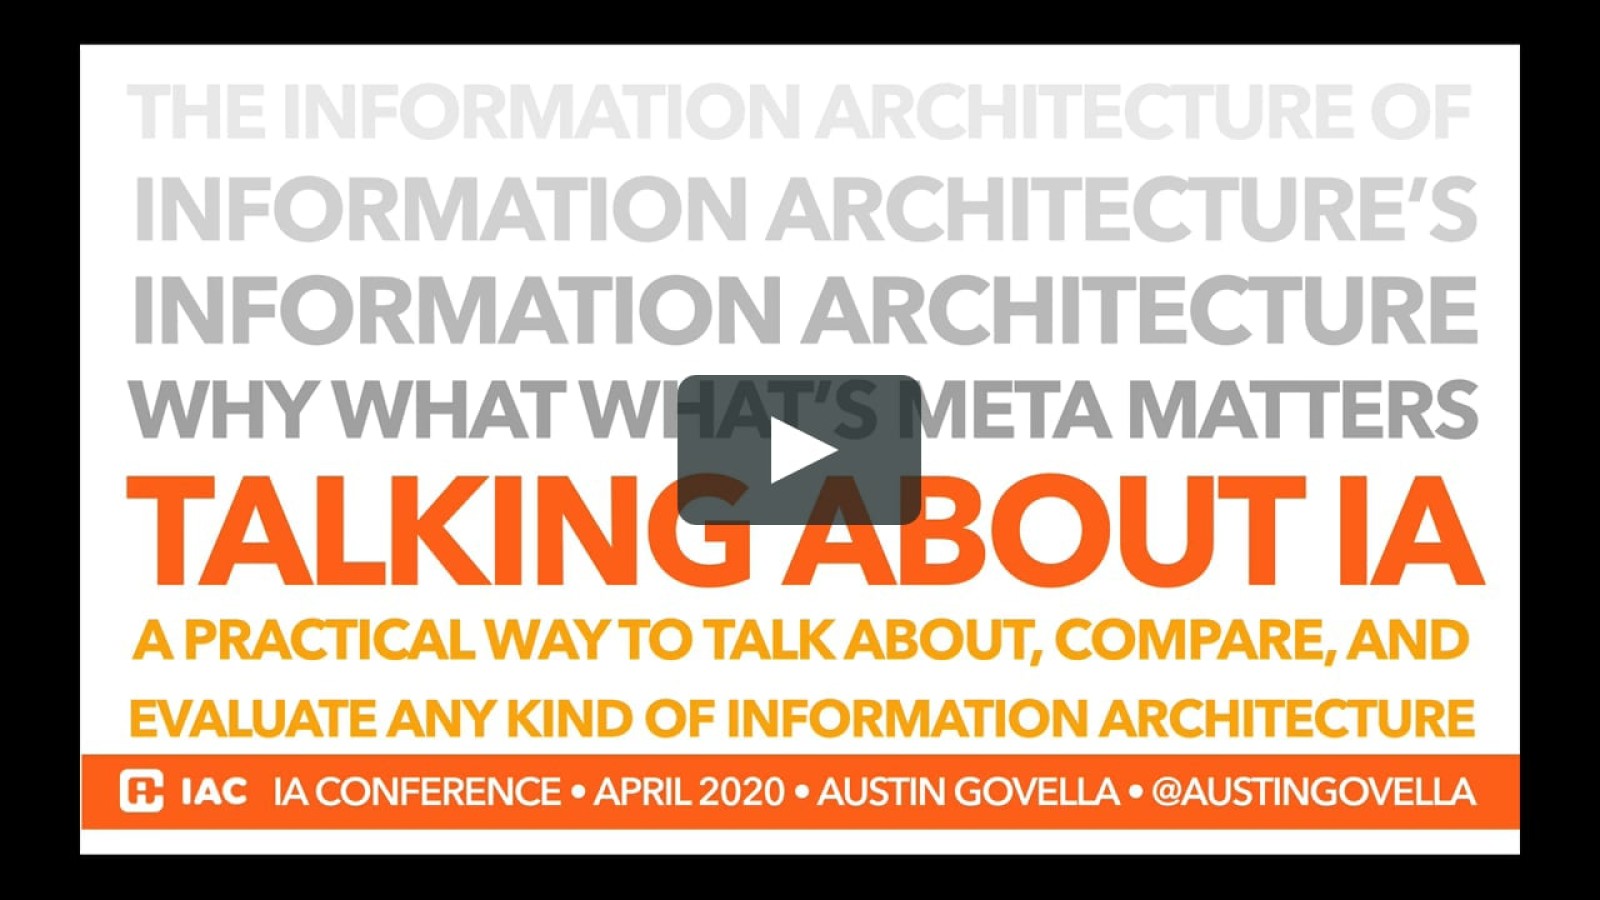 Talking about I.A. - a practical way to talk about, compare, and evaluate any kind of information architecture